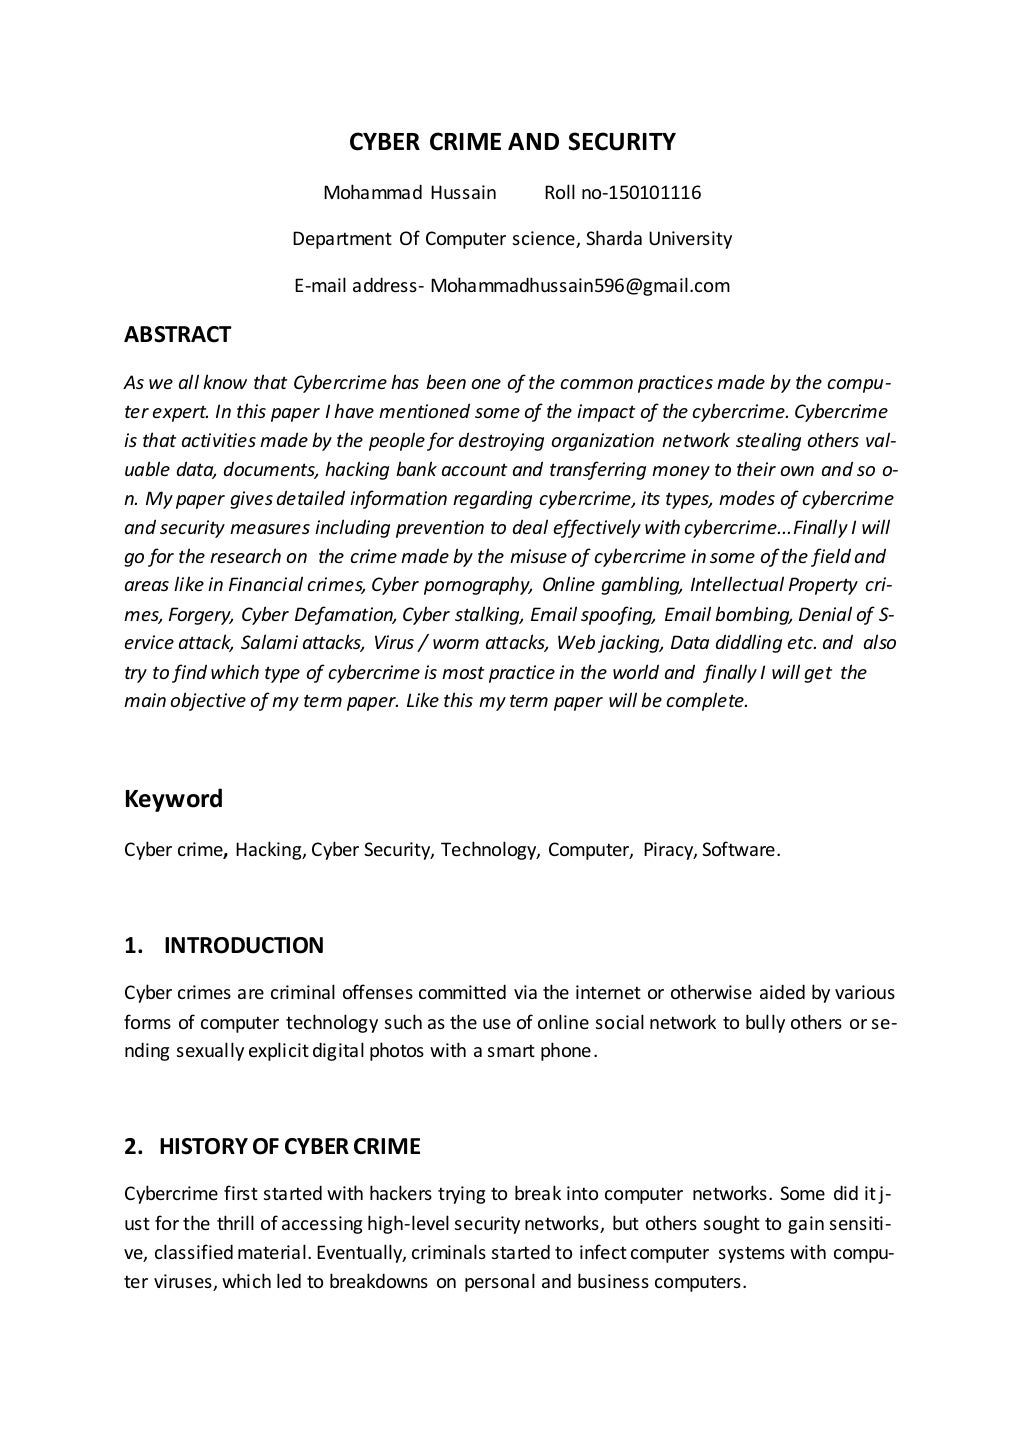 research paper on smartphone security